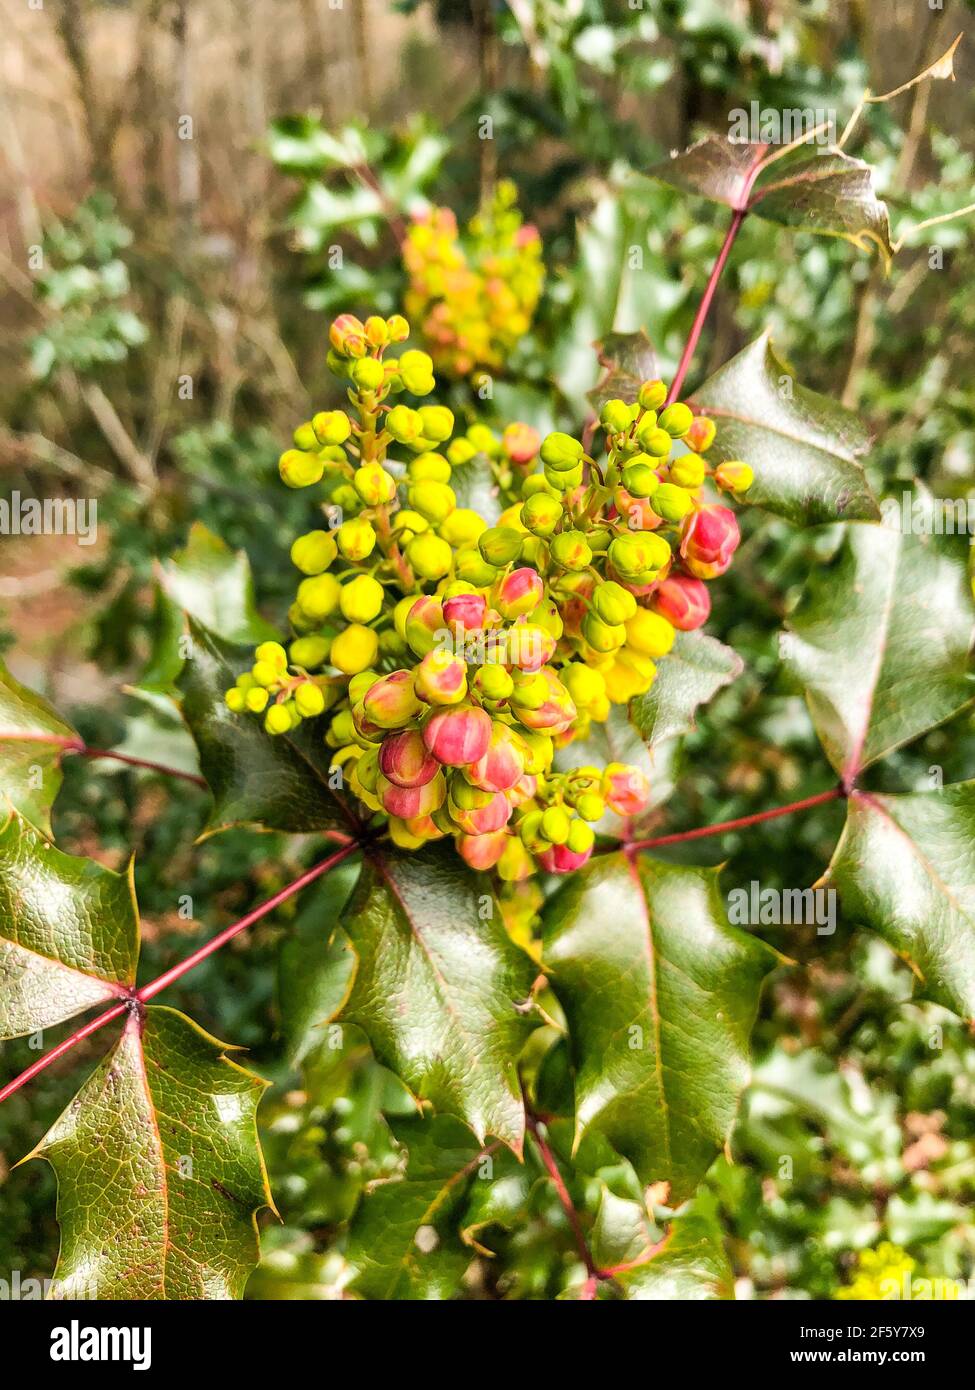 Common holly (Ilex aquifolium) is a species of holly native to western and southern Europe, northwest Africa, and southwest Asia. Stock Photo